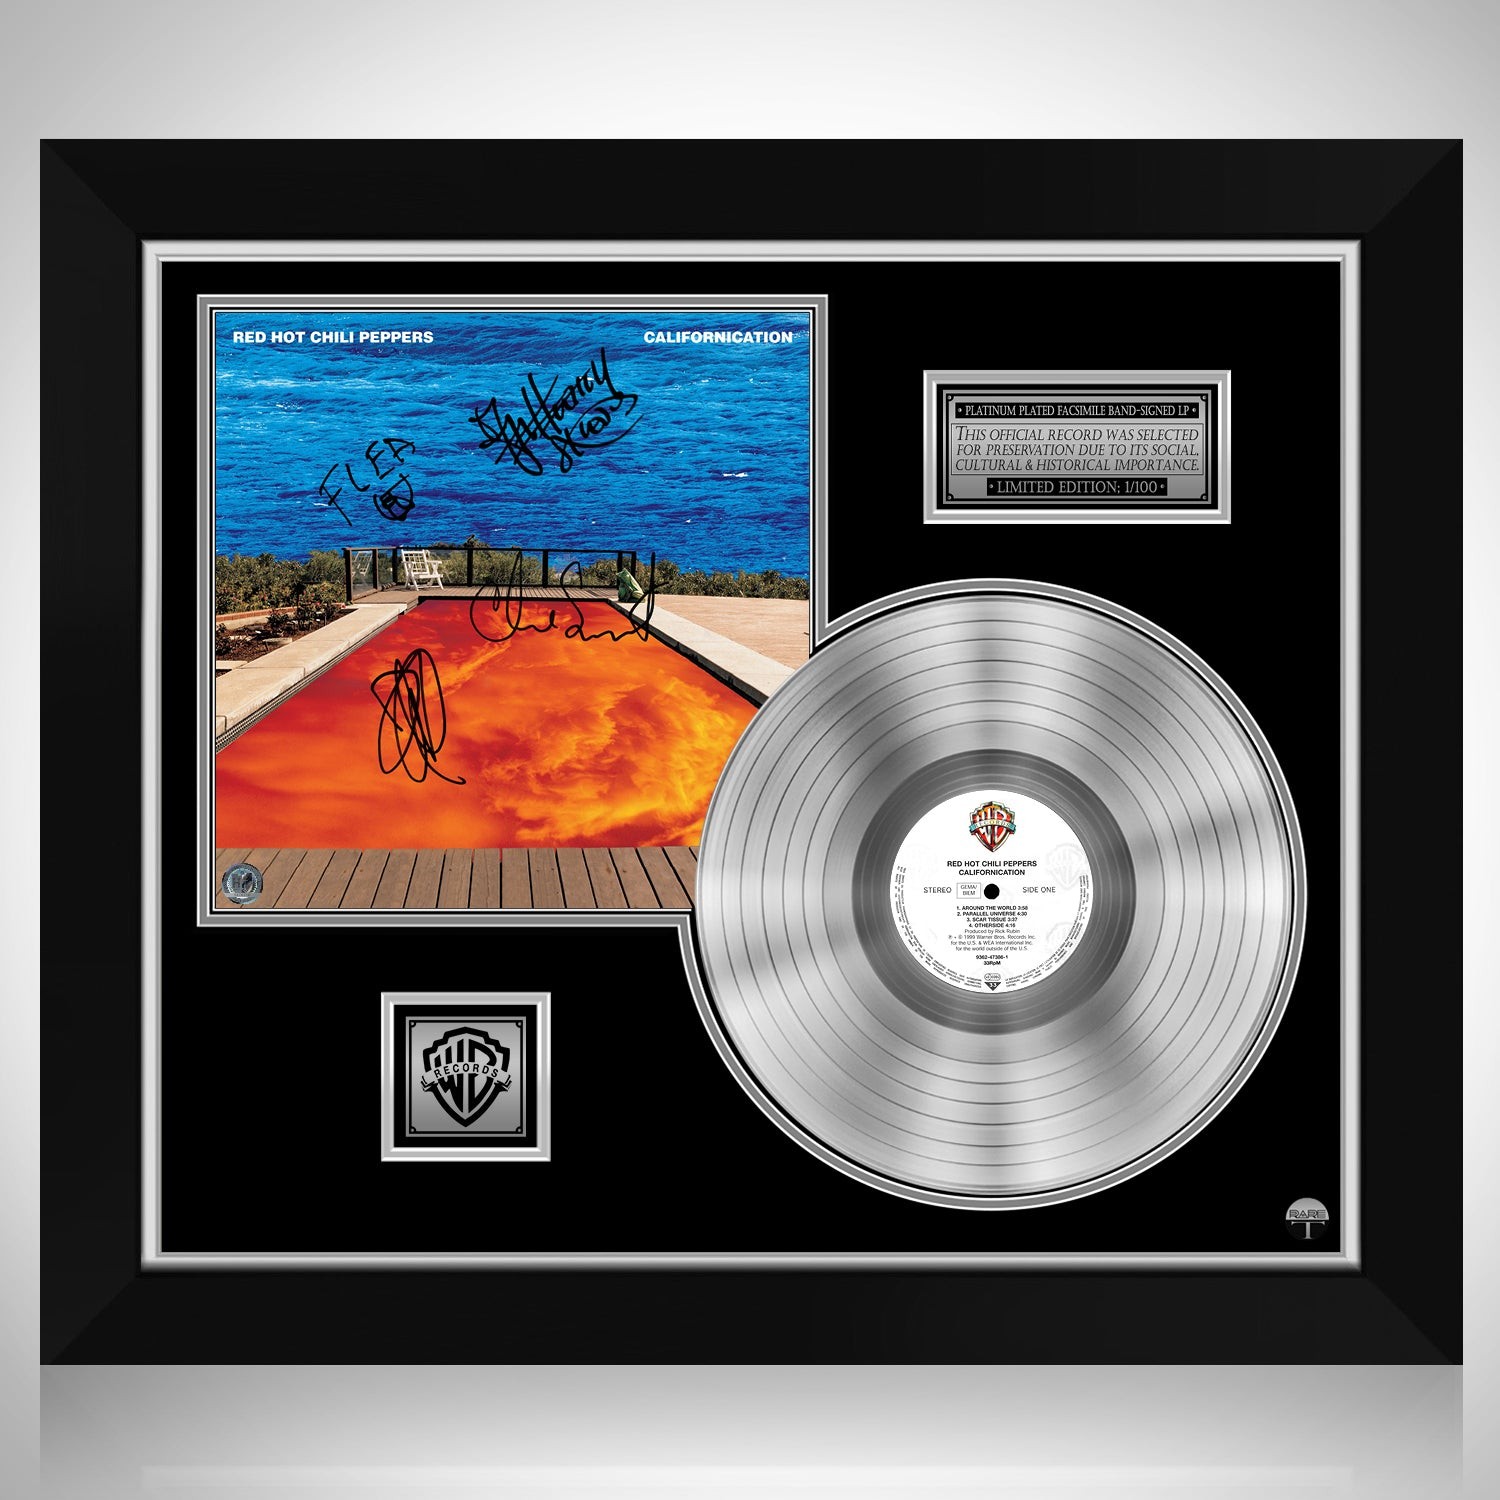 Red Hot Chili Peppers - Californication Platinum LP Limited Signature  Edition Custom Frame